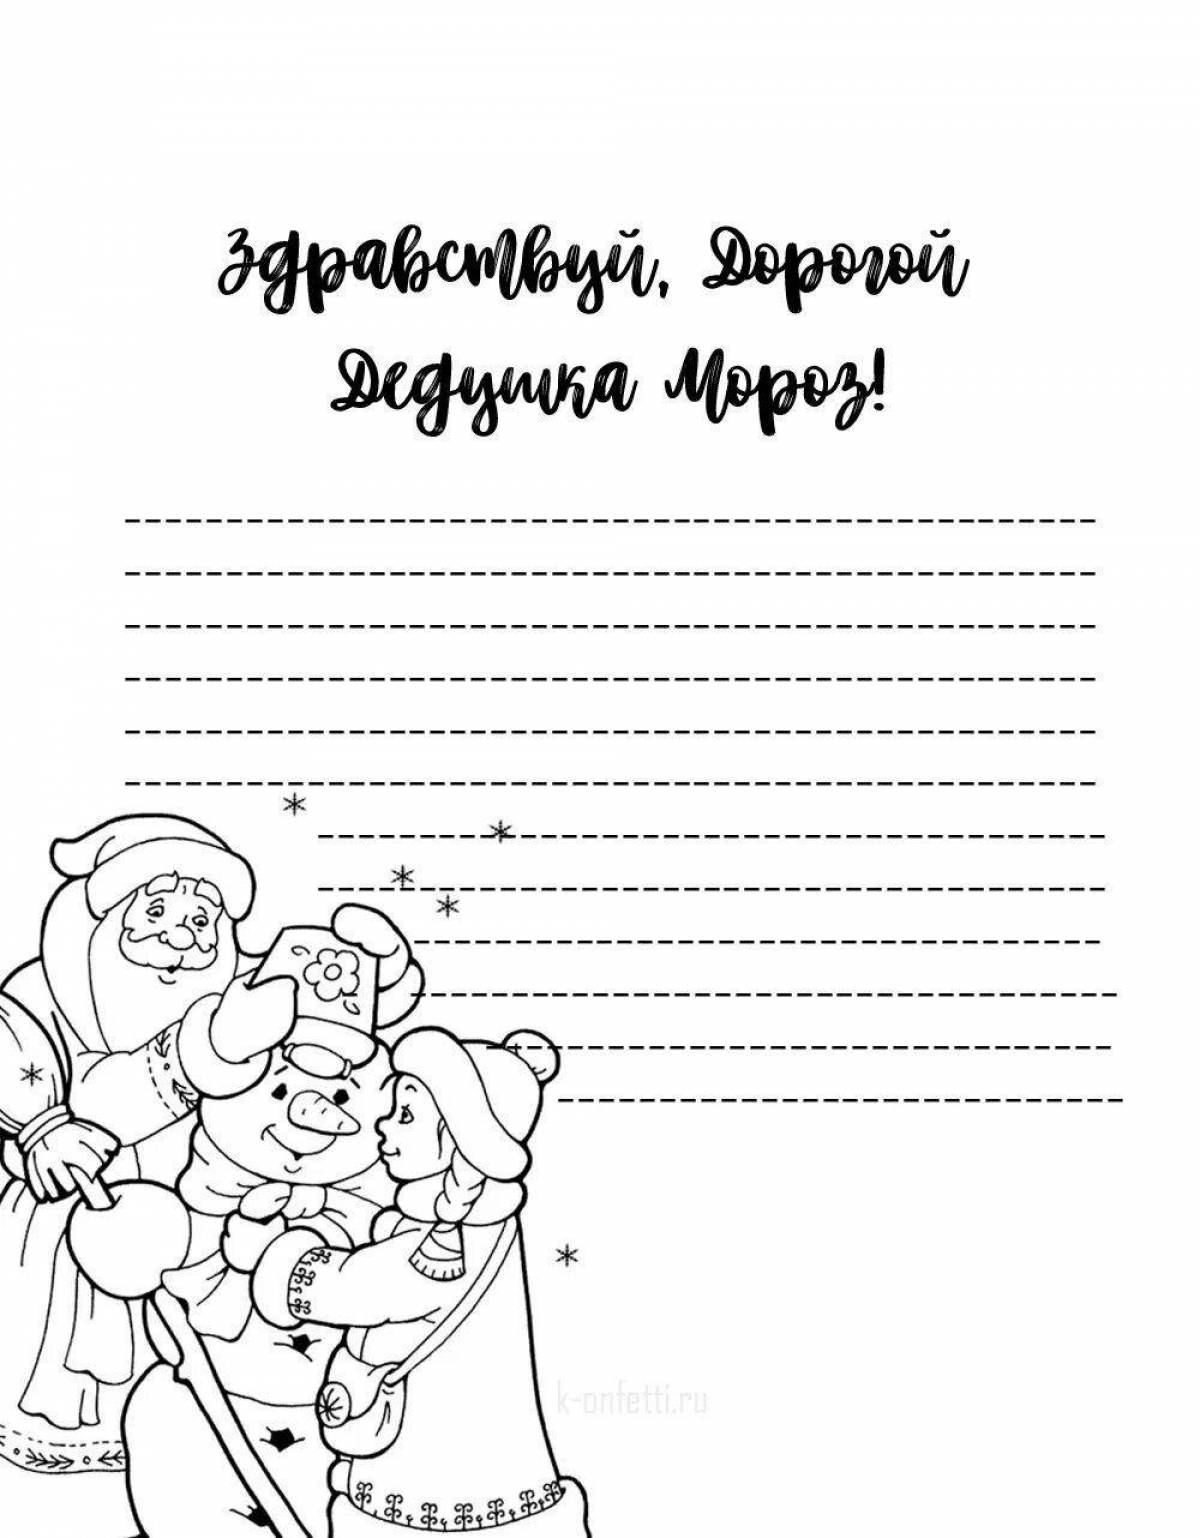 Glitter coloring letter to Santa Claus